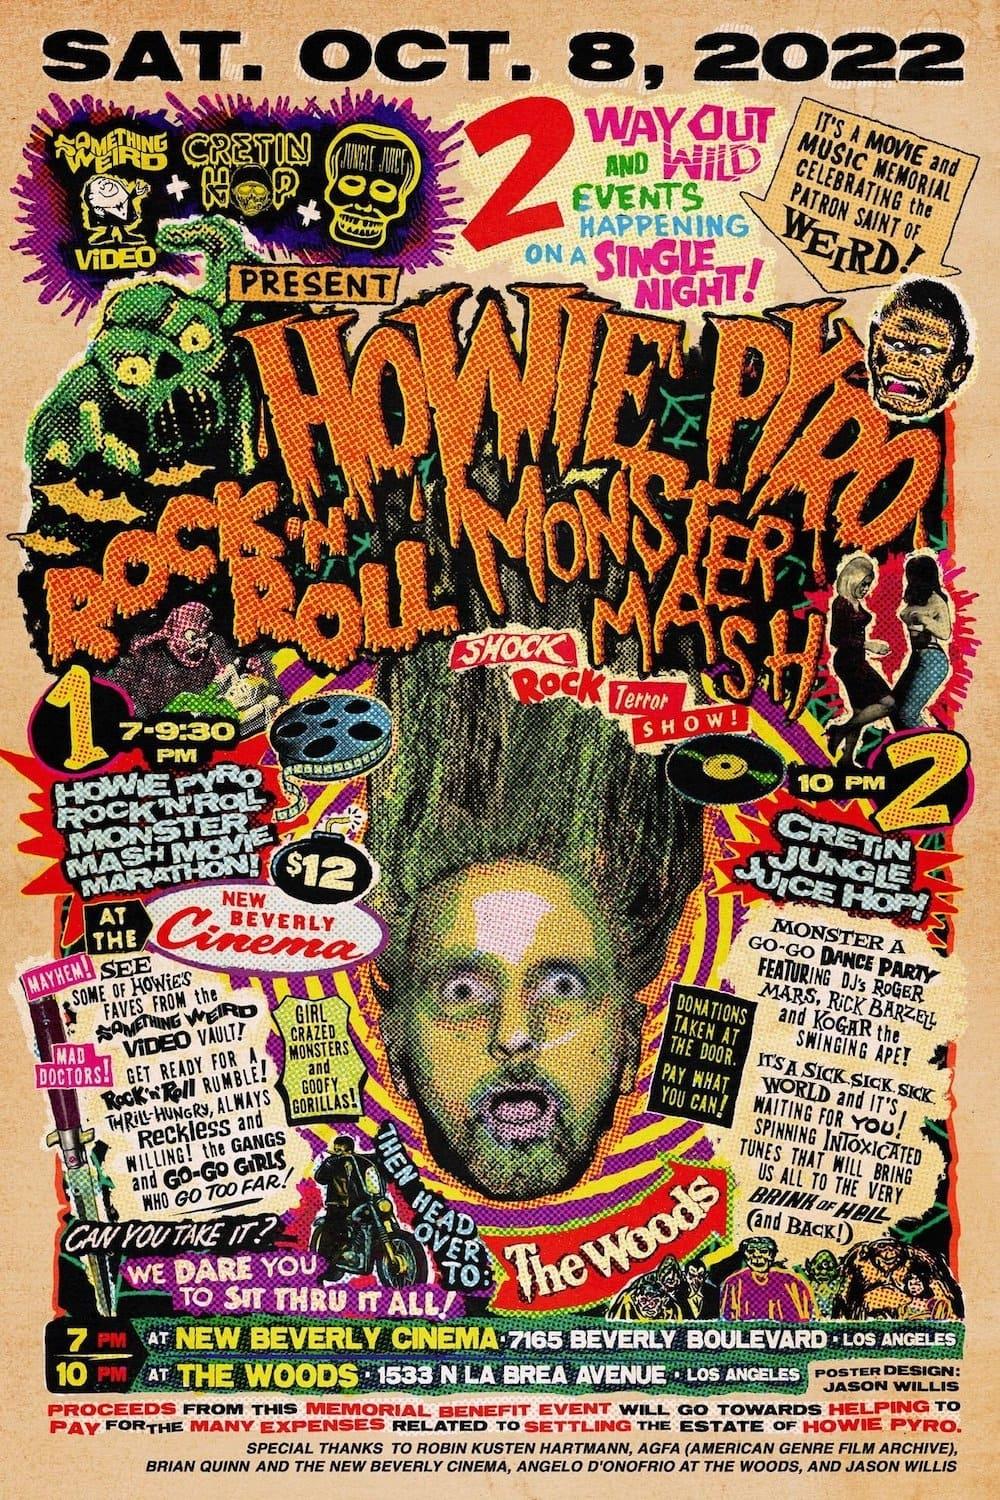 Howie Pyro Rock ‘n’ Roll Monster Mash! poster